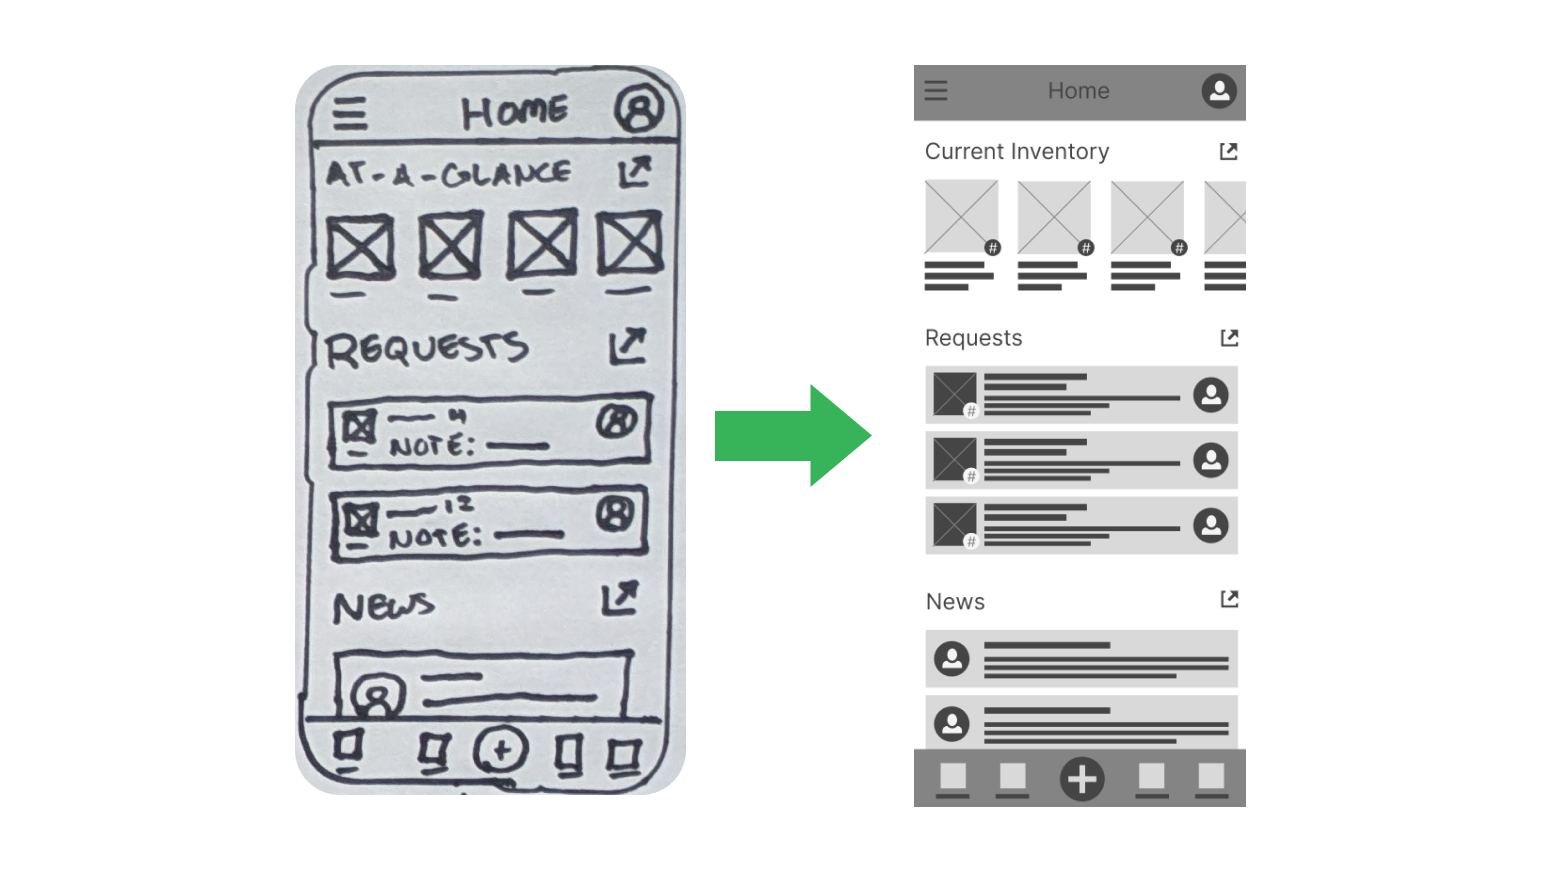 A screen shot showing the transformation of the home page from the original rough sketch on the left to the low fidelity digital wireframe on the right. A green arrow points from left to right, indicating the transformation.